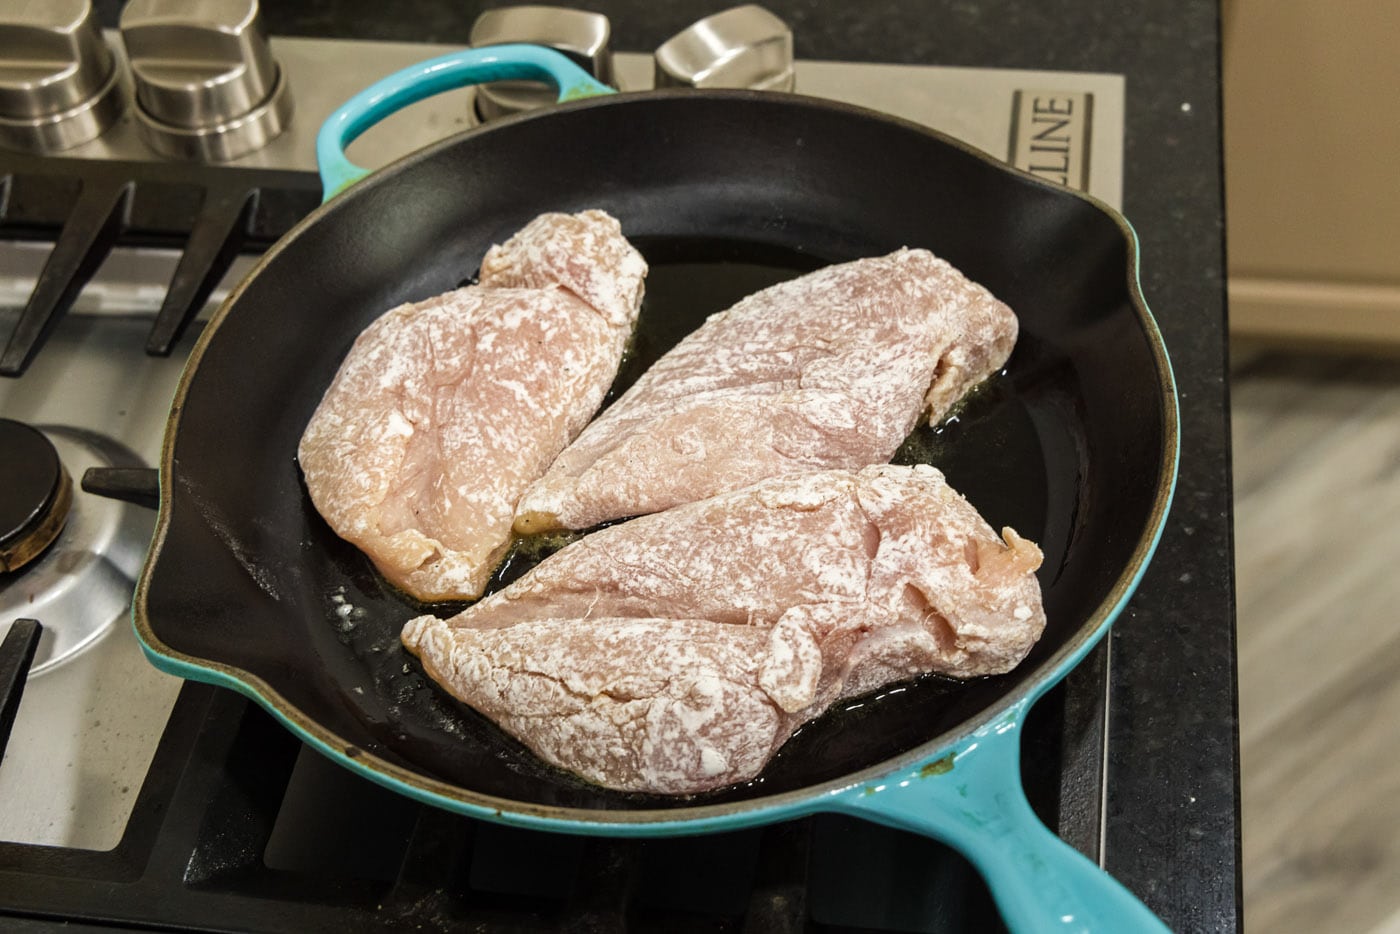 searing flour coated chicken breasts in a skillet